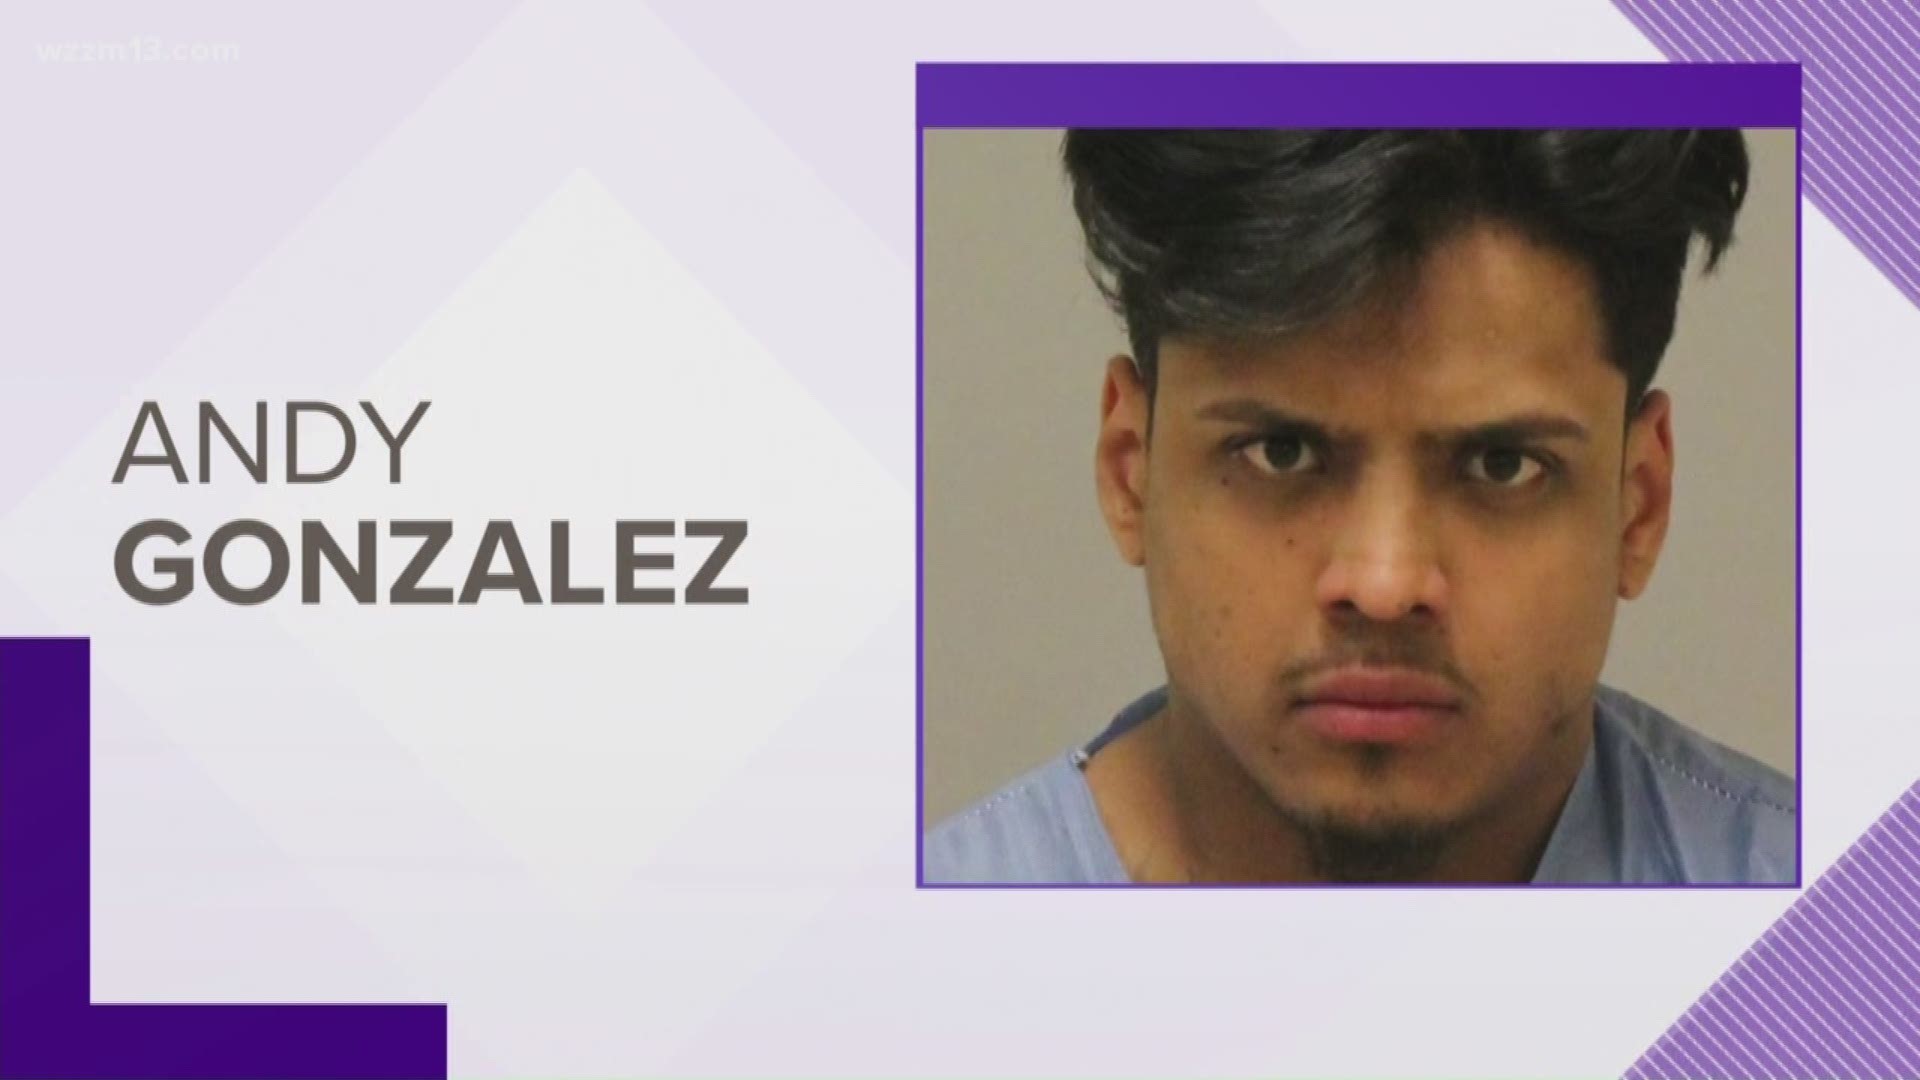 Gonzalez on trial for shooting two people